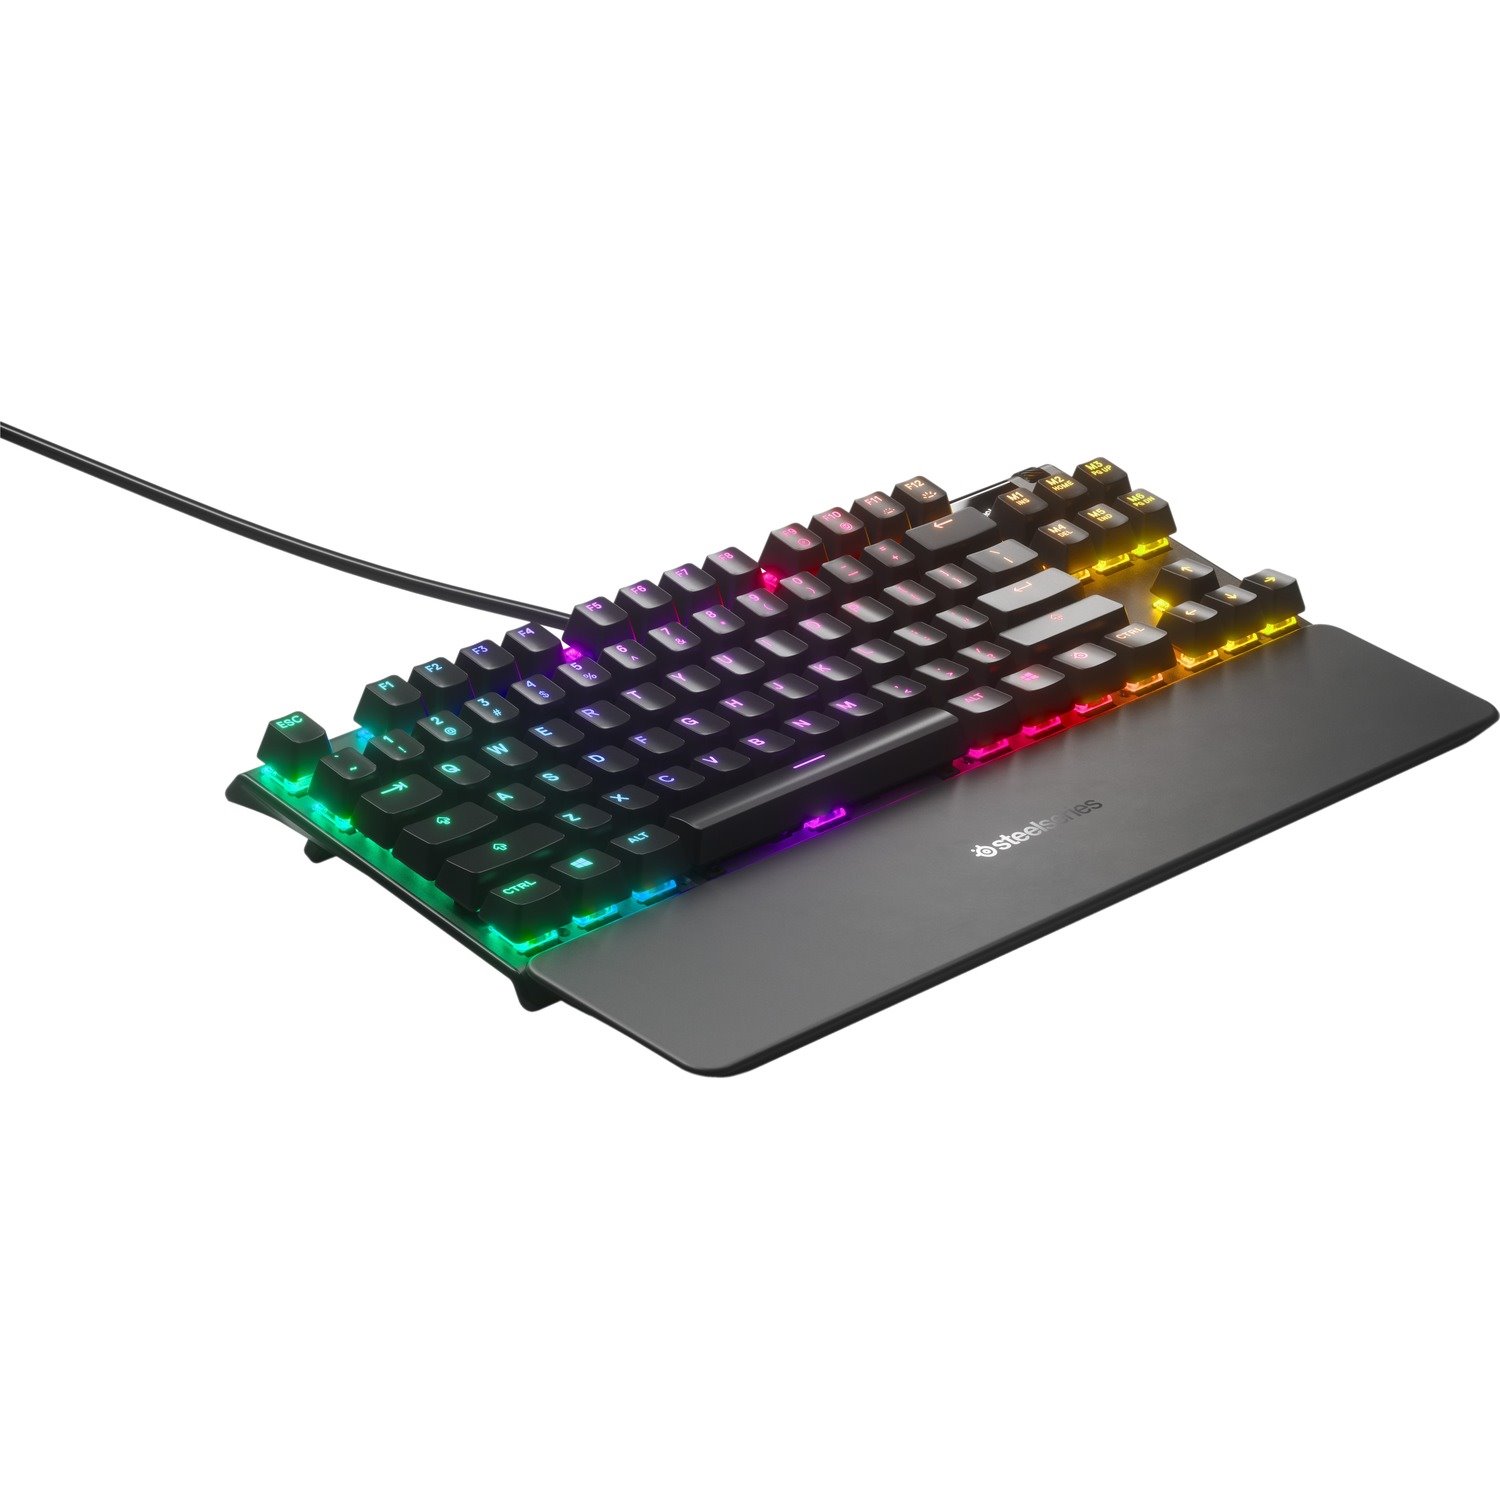 SteelSeries Apex Pro TKL Gaming Keyboard - Cable Connectivity - USB Type C Interface - RGB LED